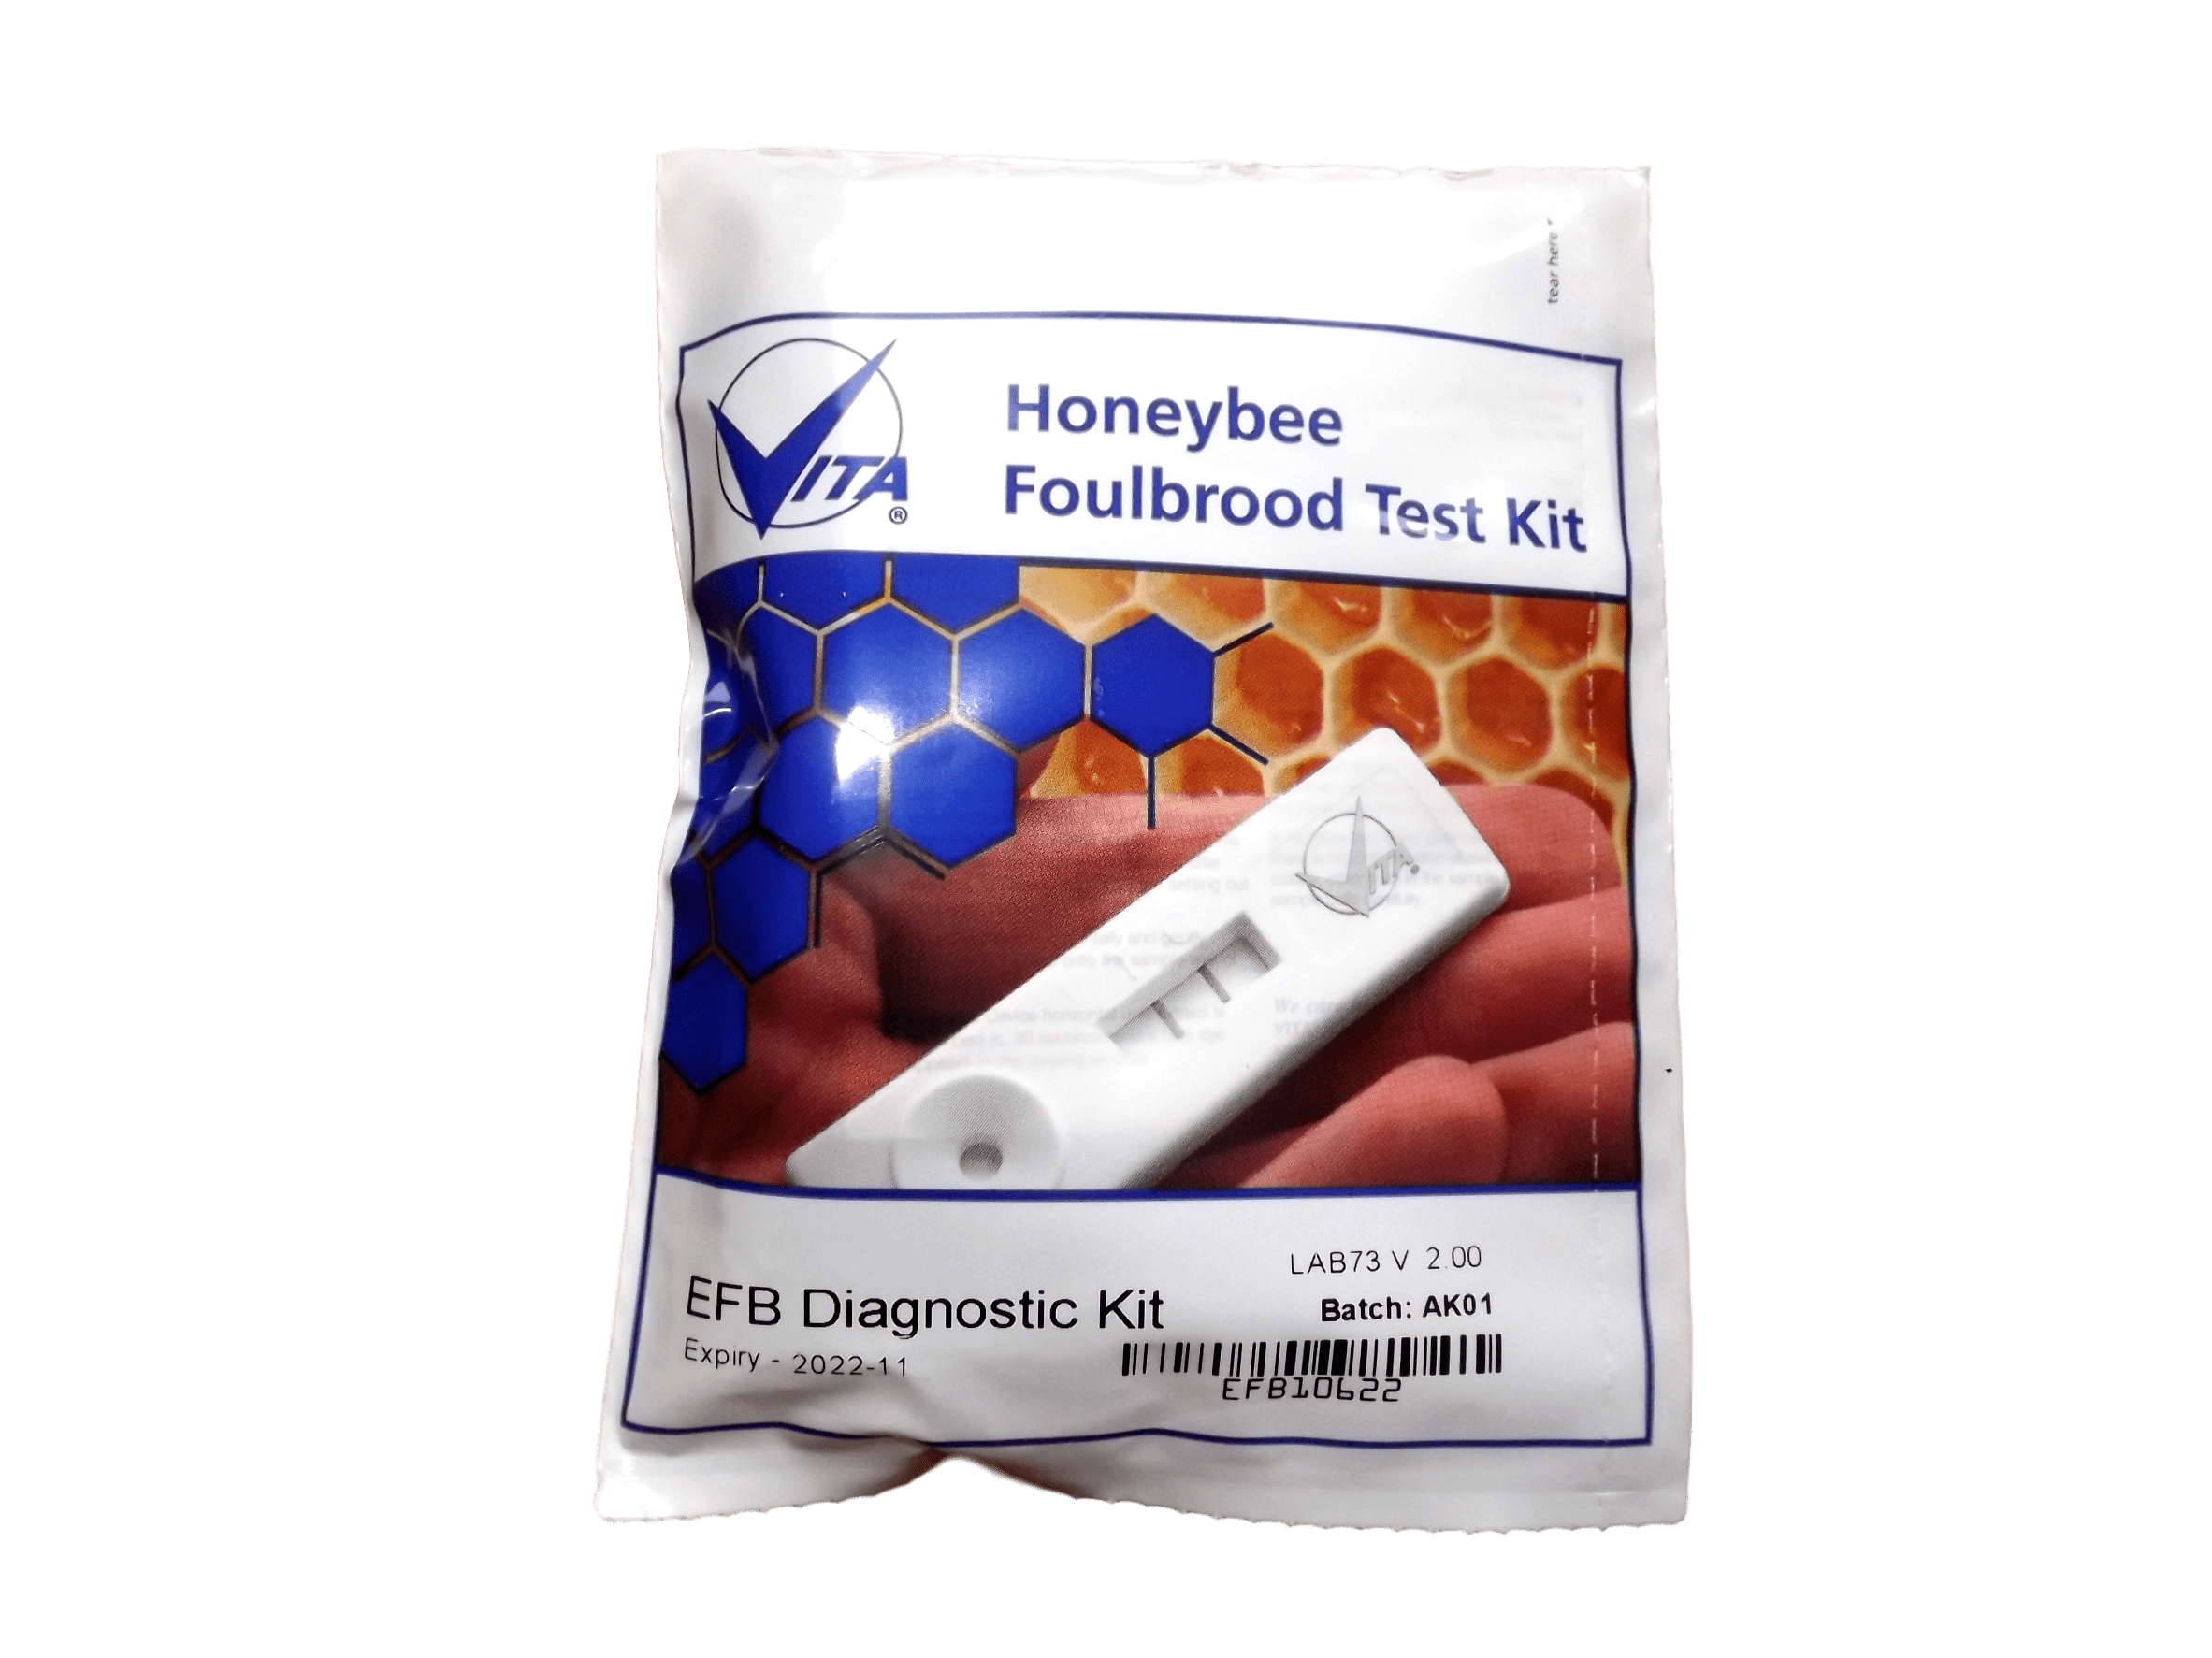 EFB Test Kit - Expiry Date - March 2025